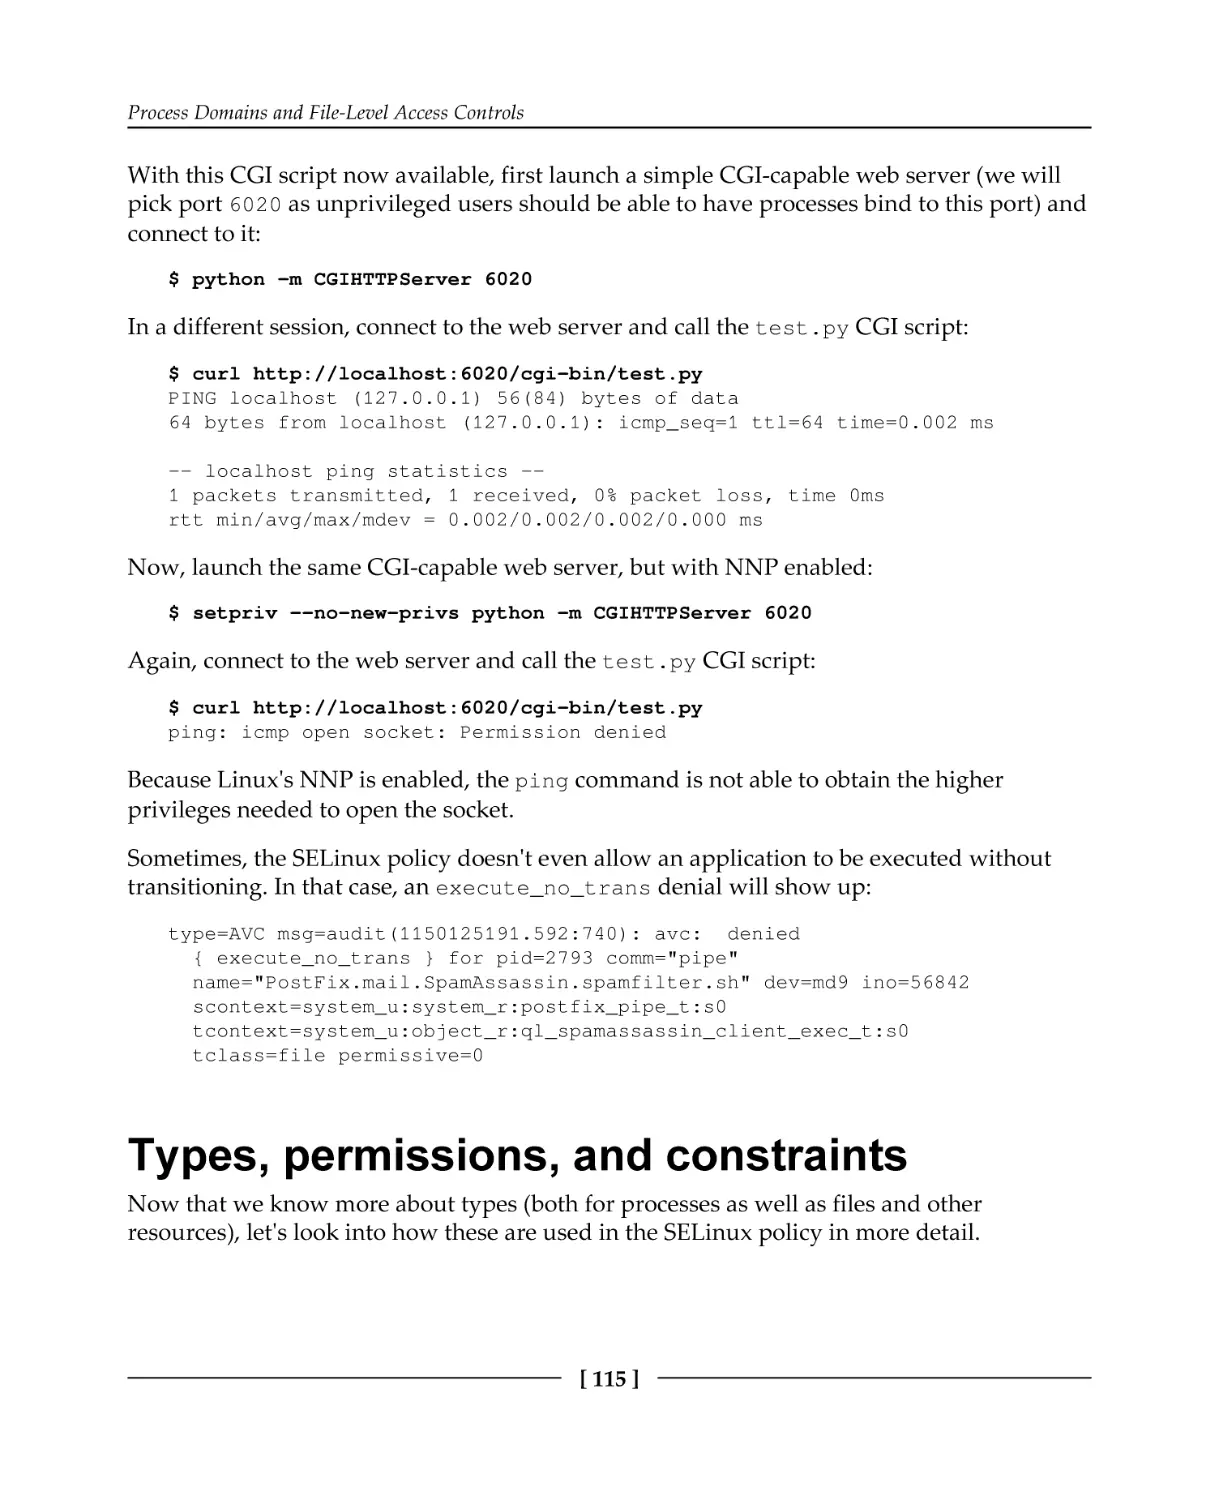 Types, permissions, and constraints